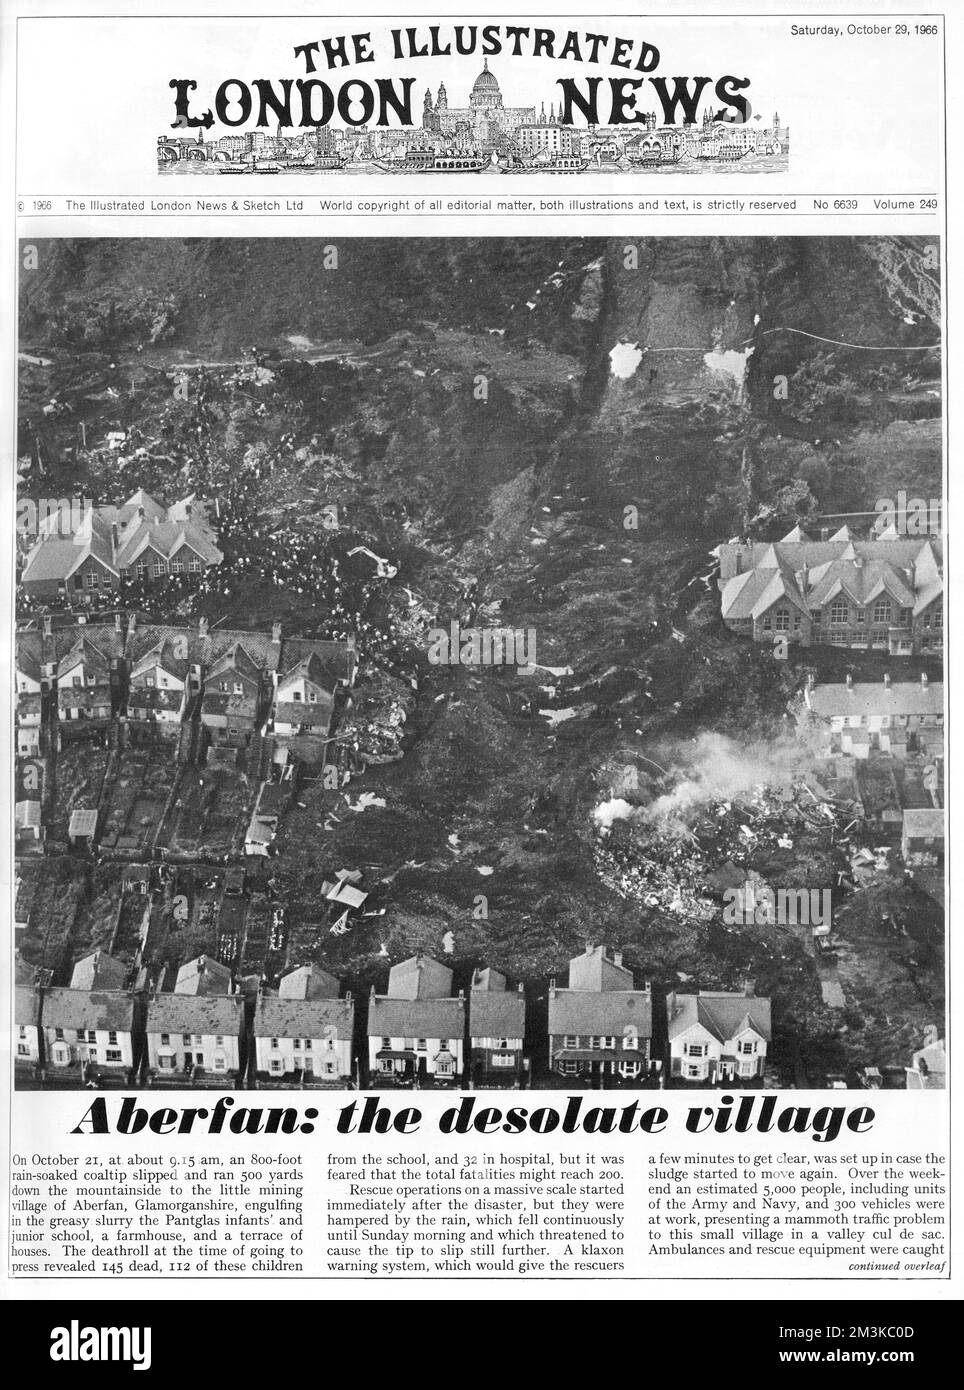 The front page of The Illustrated London News, reporting on the Aberfan disaster. An aerial view of the path of destruction left by the rain-soaked coal tip that slipped 500 yards down the mountainside into the mining village of Aberfan, Glamorgan, South Wales. The Pantglas infants and junior school, a farmhouse and a terrace of houses were engulfed in the slurry.  21st October 1966 Stock Photo